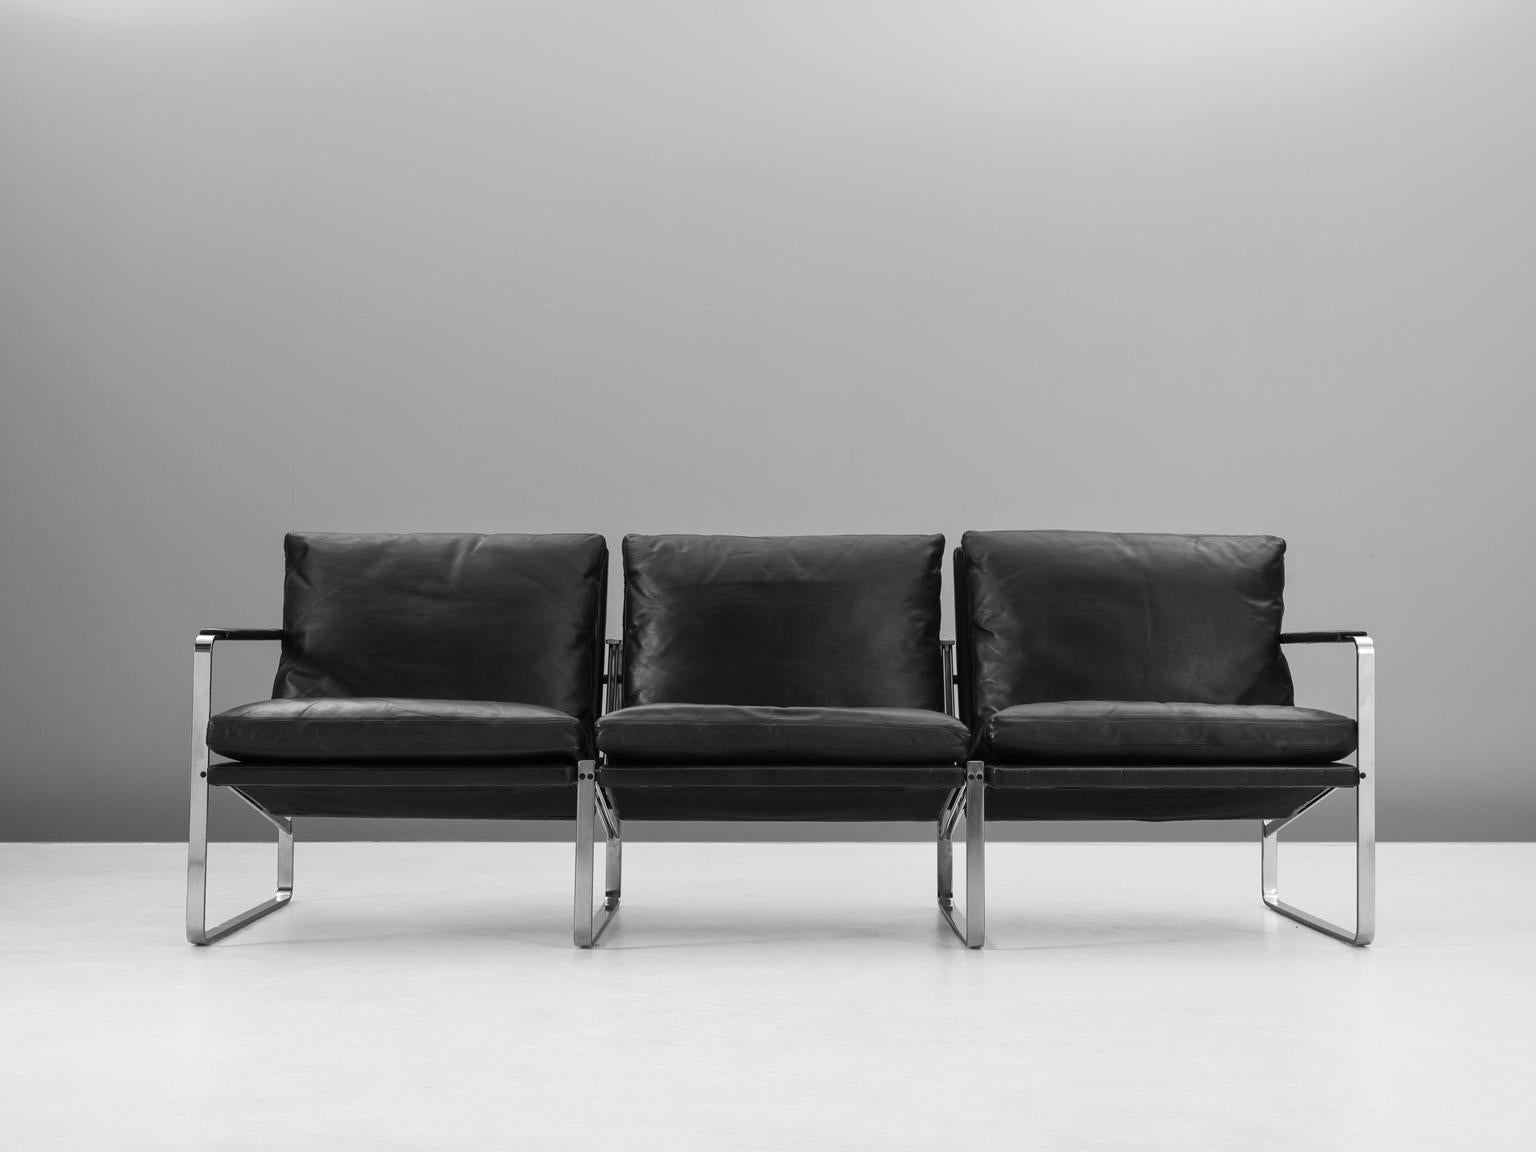 Preben Fabricius for Walter Knoll, three-seat sofa, black leather and steel, 1970s.

This very beautiful black sofa with four square steel base's is very comfortable. The soft black leather cushions provide the back with excellent support and it's